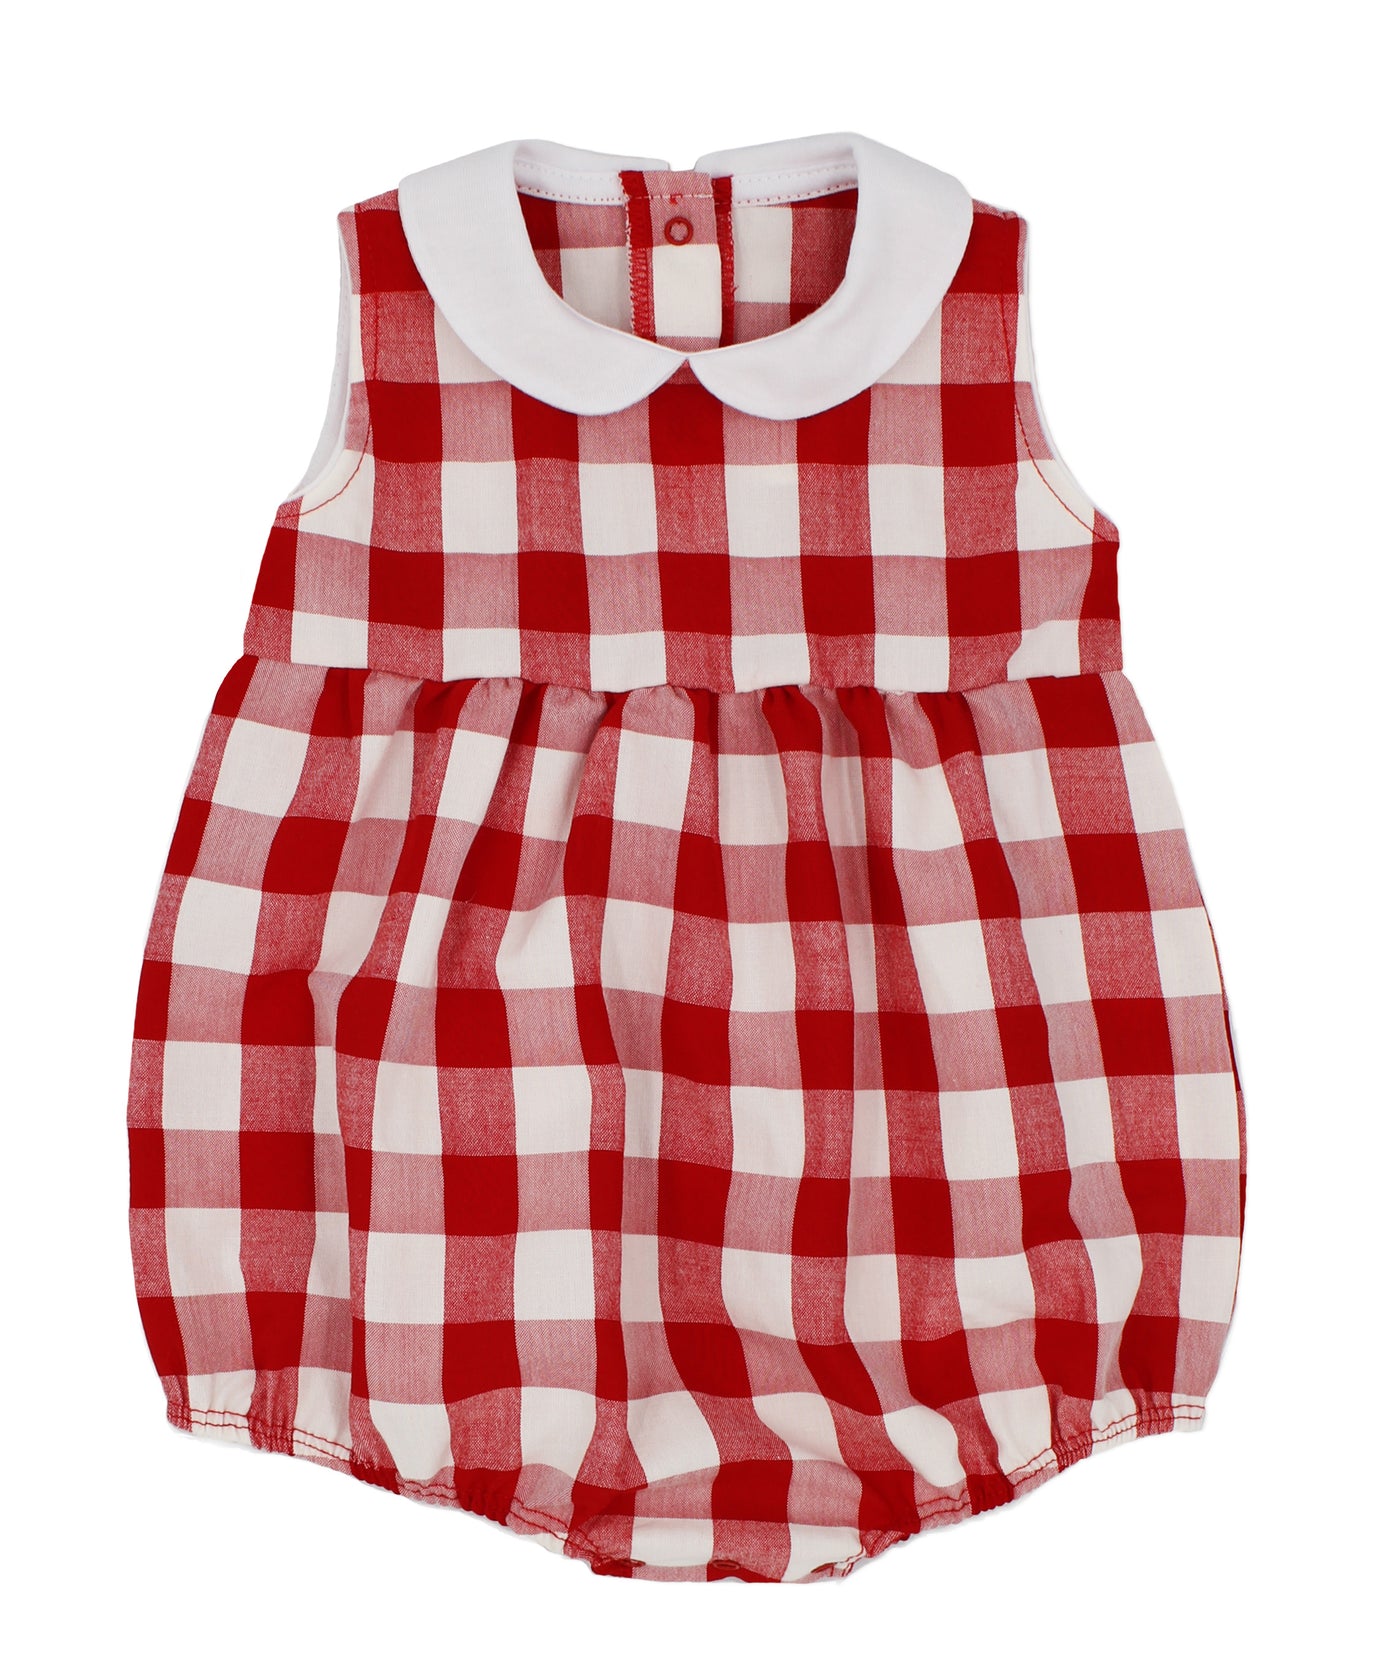 Red Gingham Peter Pan Collar Romper by Rapife